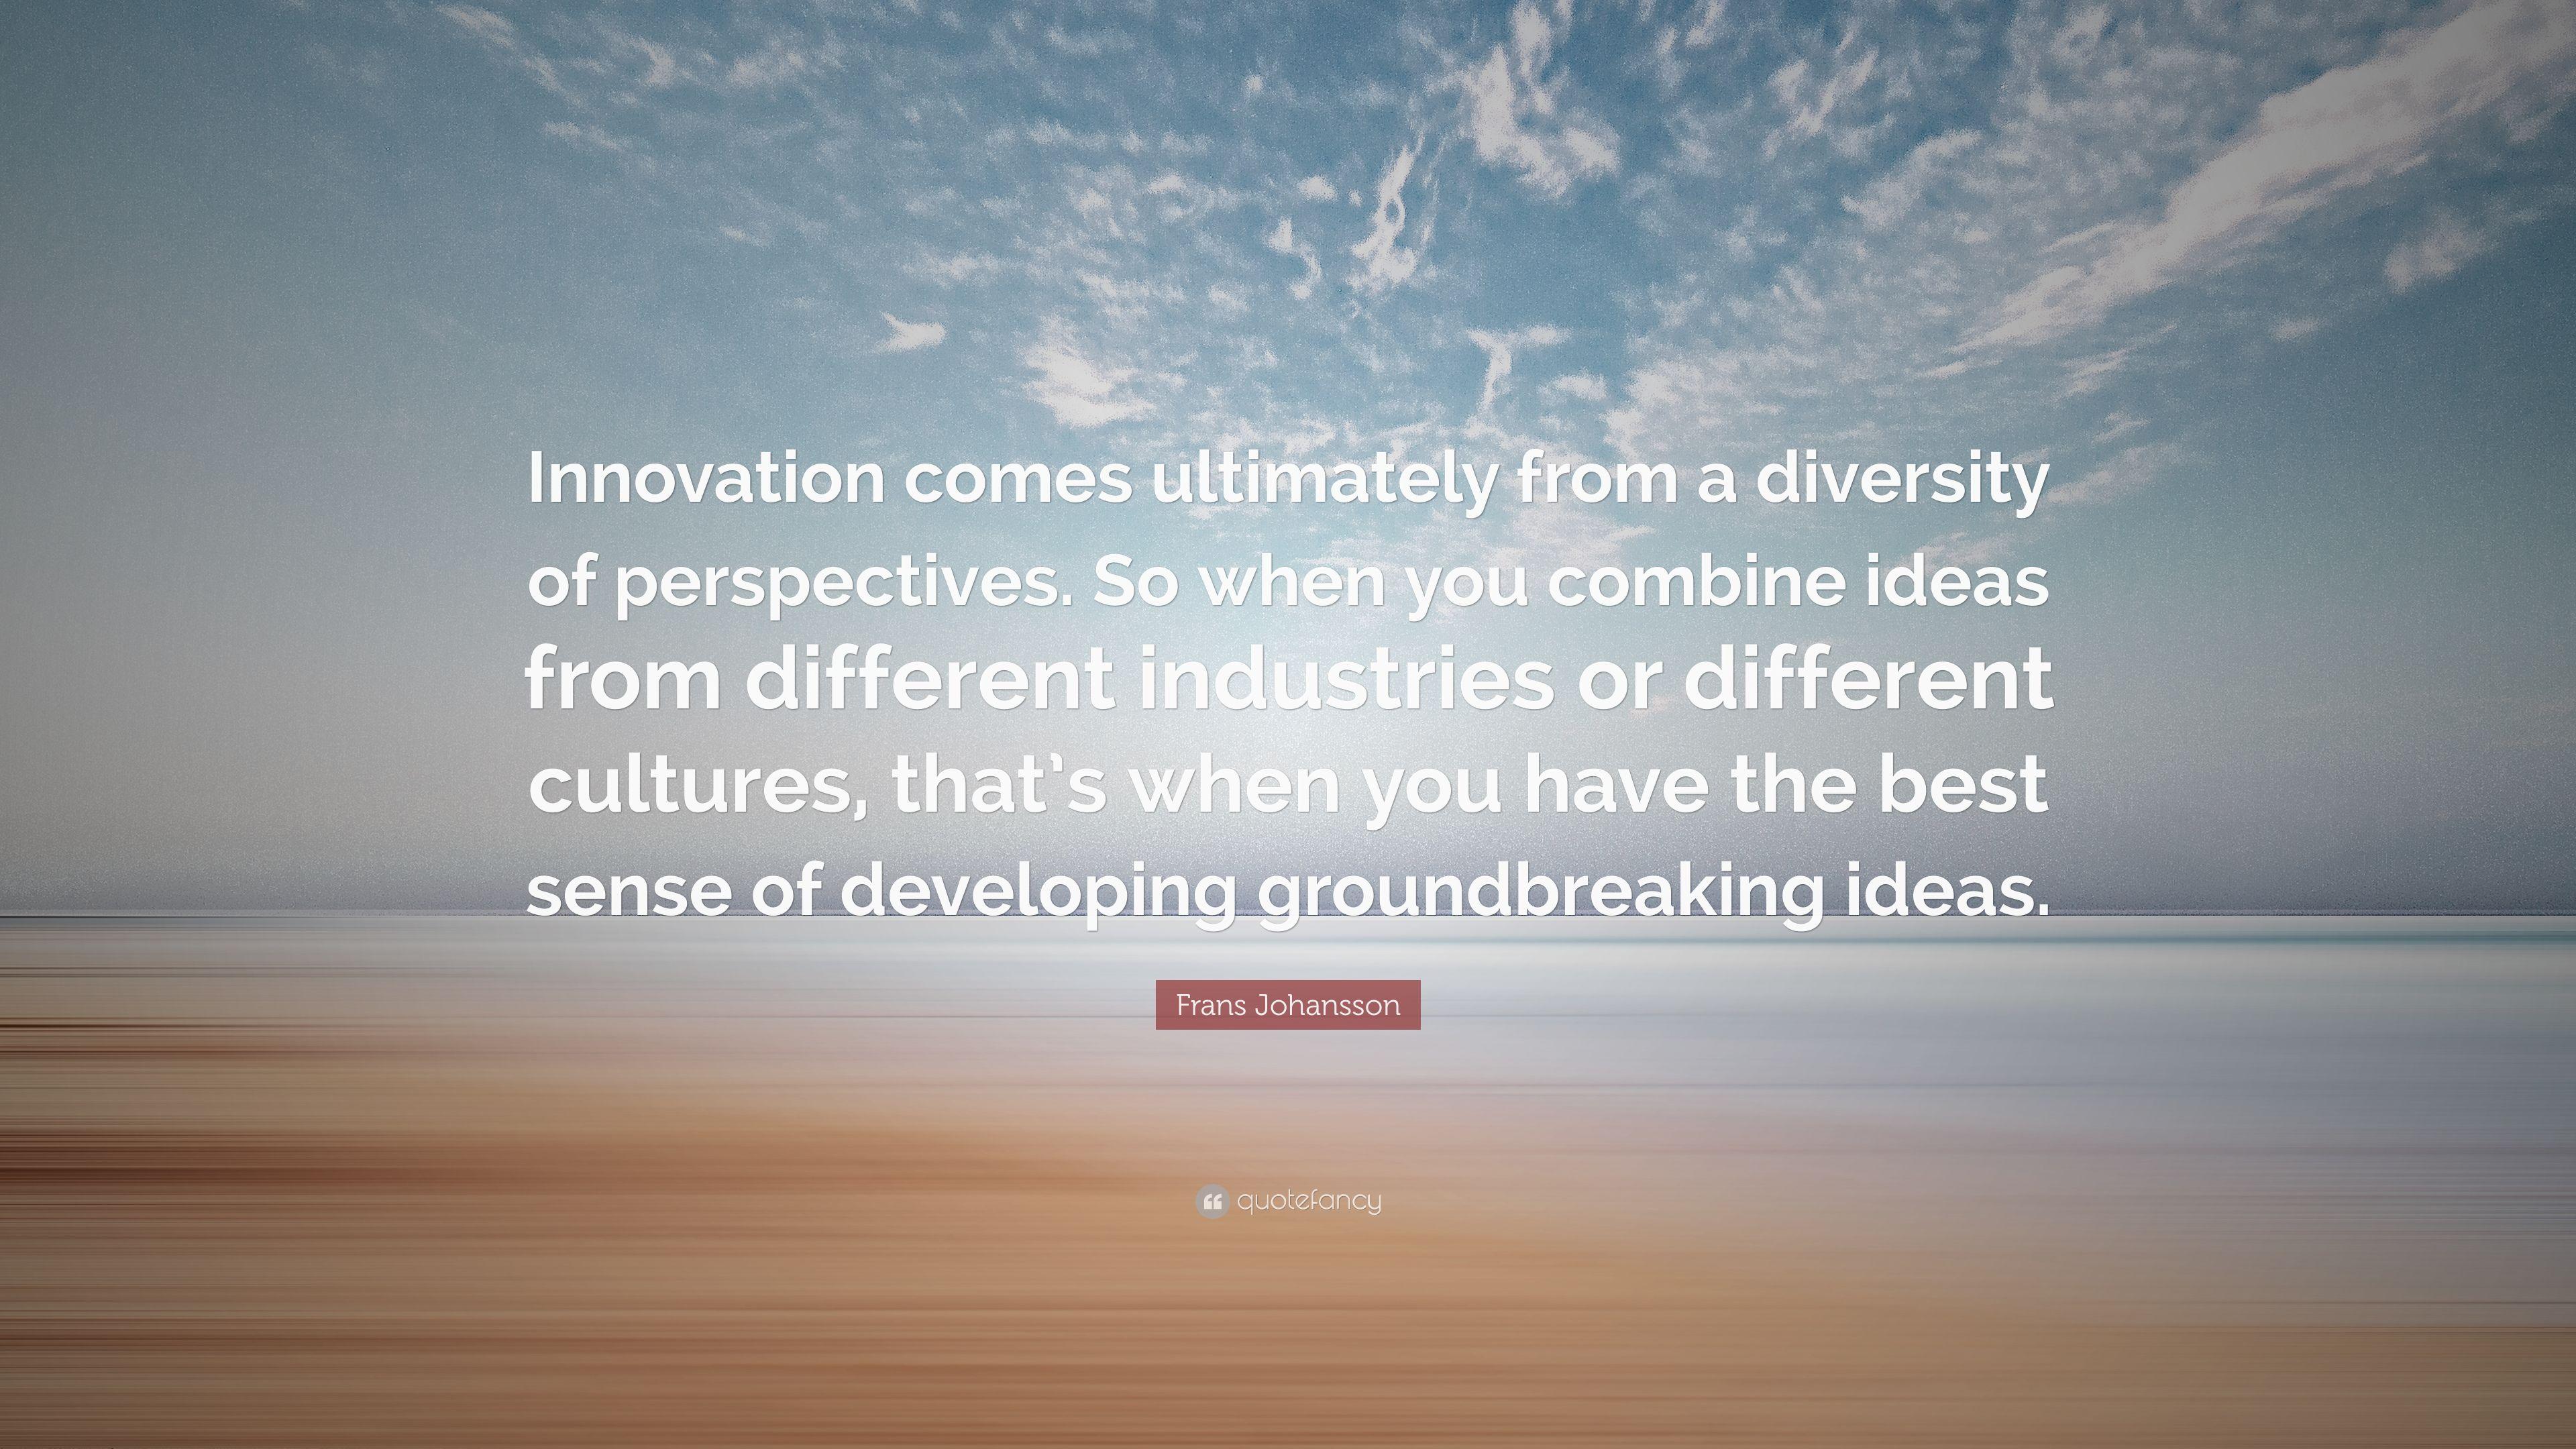 Frans Johansson Quote: “Innovation comes ultimately from a diversity